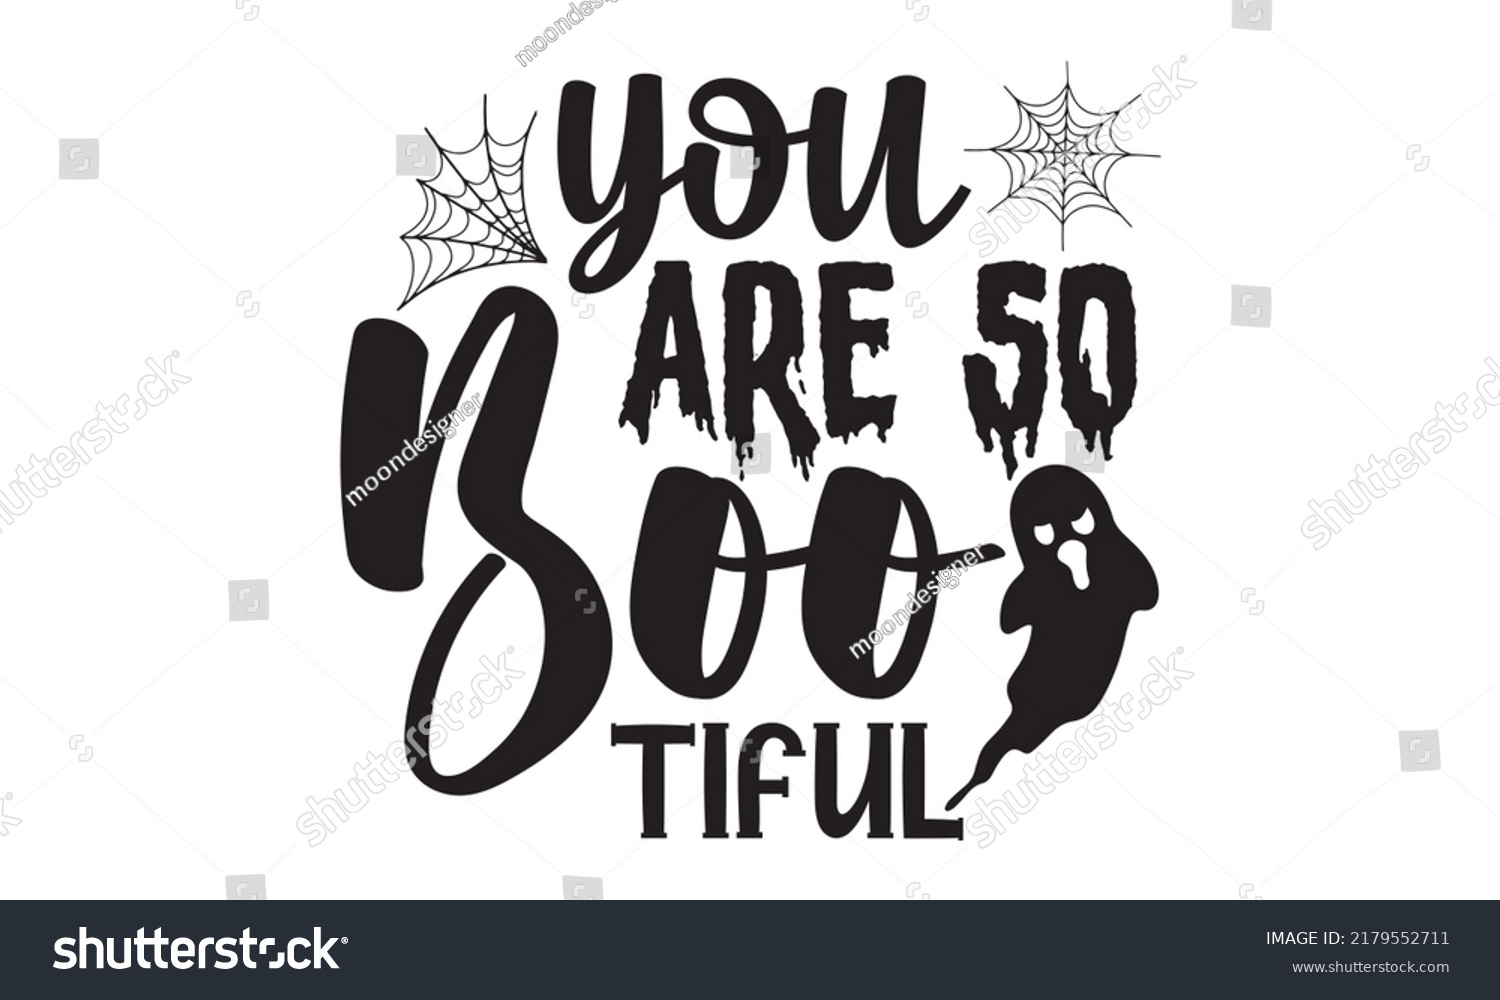 SVG of You are so boo-tiful-Halloween Svg, T-Shirt Design, vector Illustration isolated on white background, Handwritten script for holiday party celebration svg